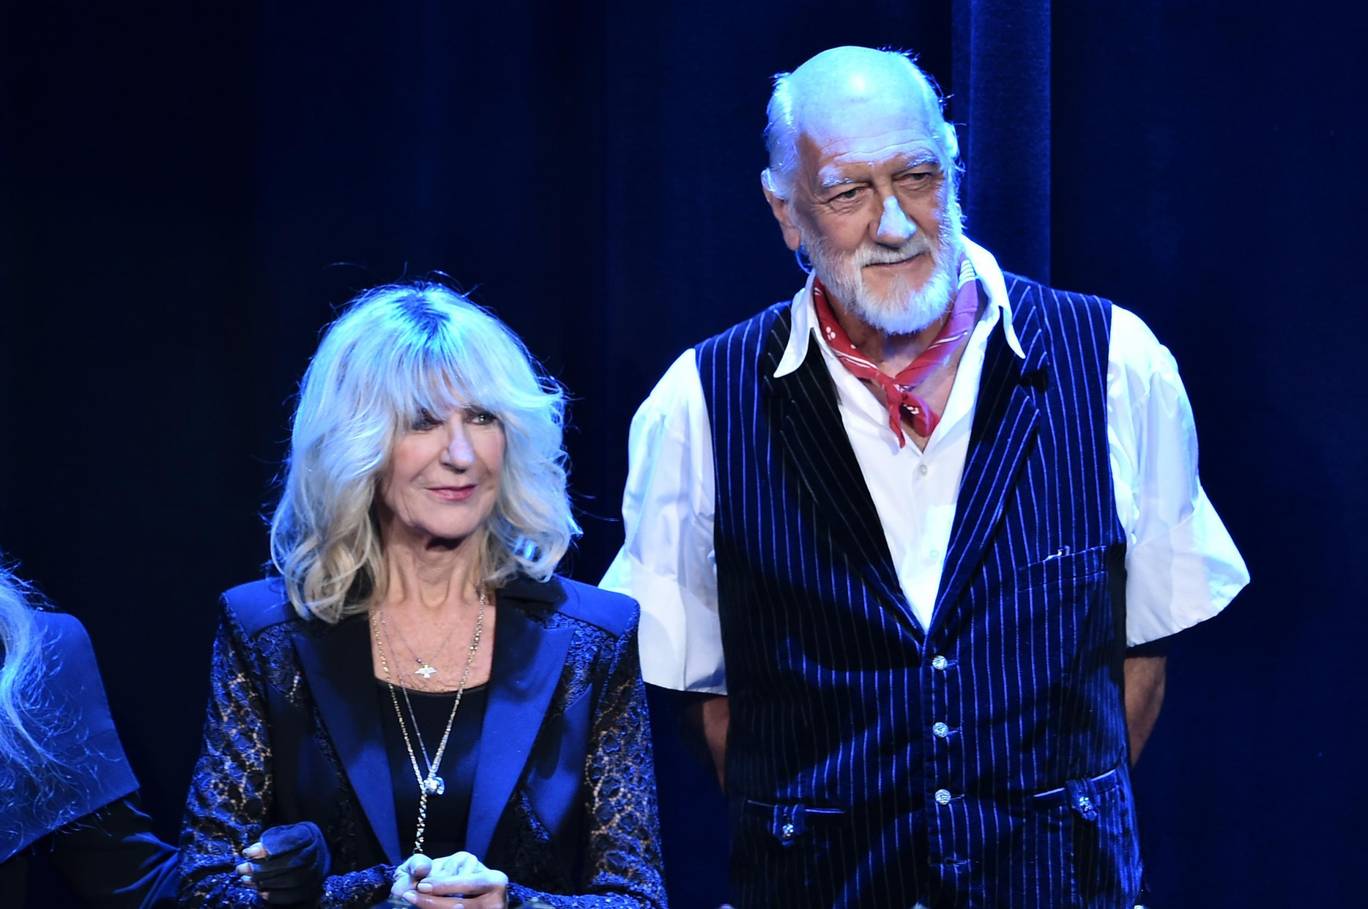 Fleetwood Mac News: INTERVIEW Mick Fleetwood and Christine McVie speak with  the UK's Independent